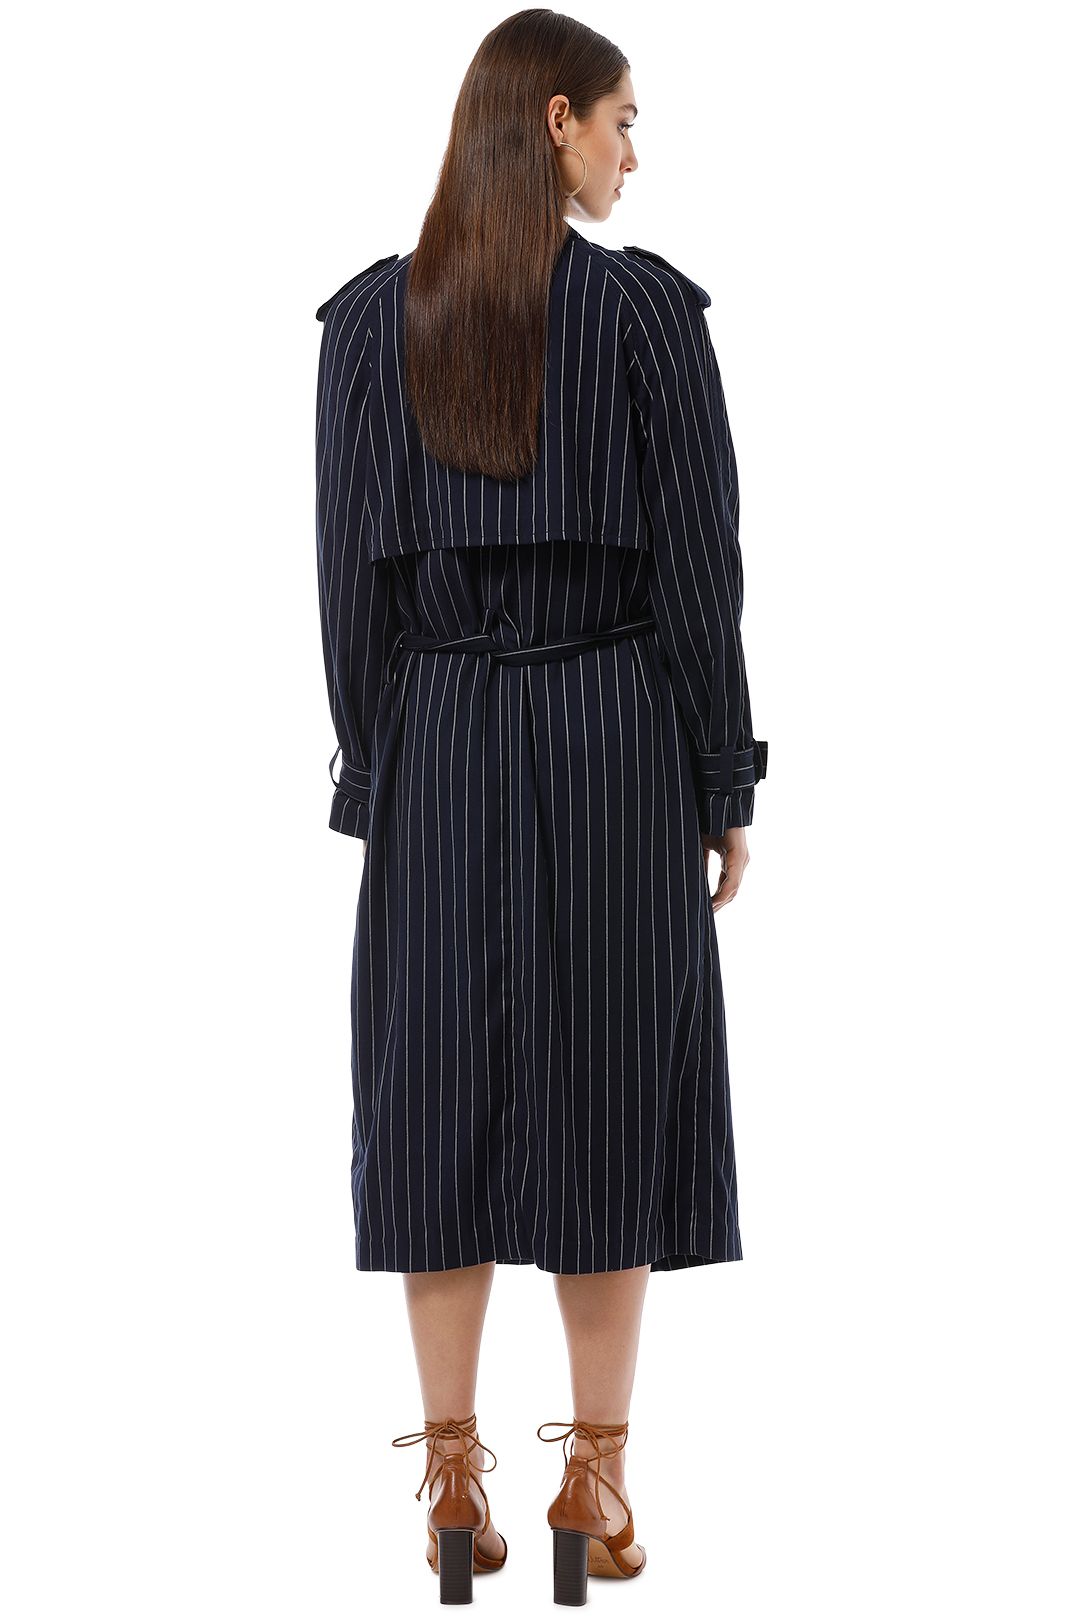 Camilla and Marc - Franca Trench - Navy - Back